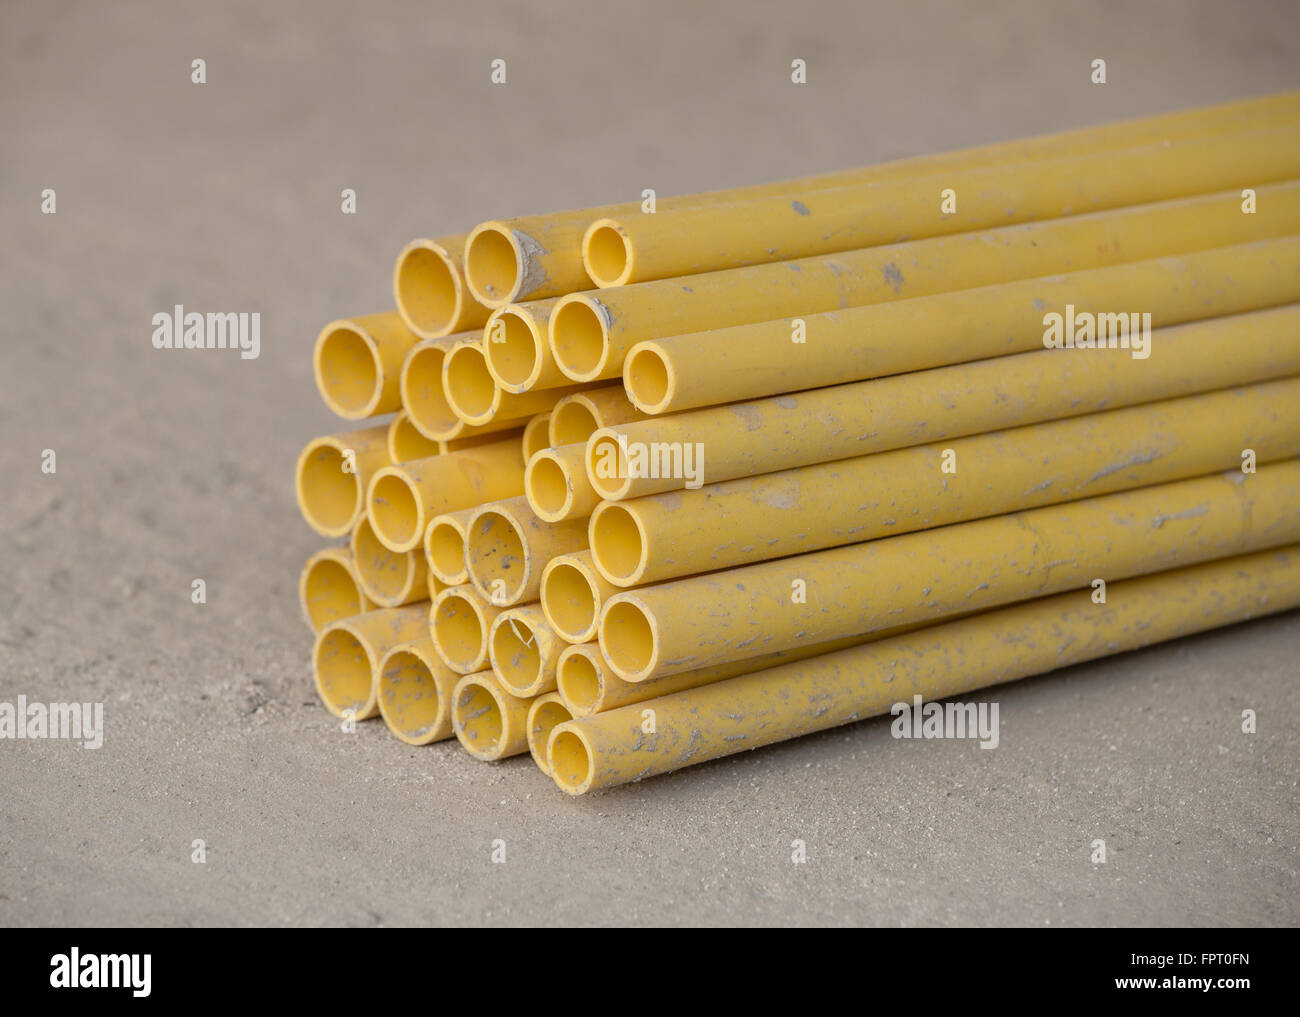 yellow PVC pipes for electric conduit Stock Photo